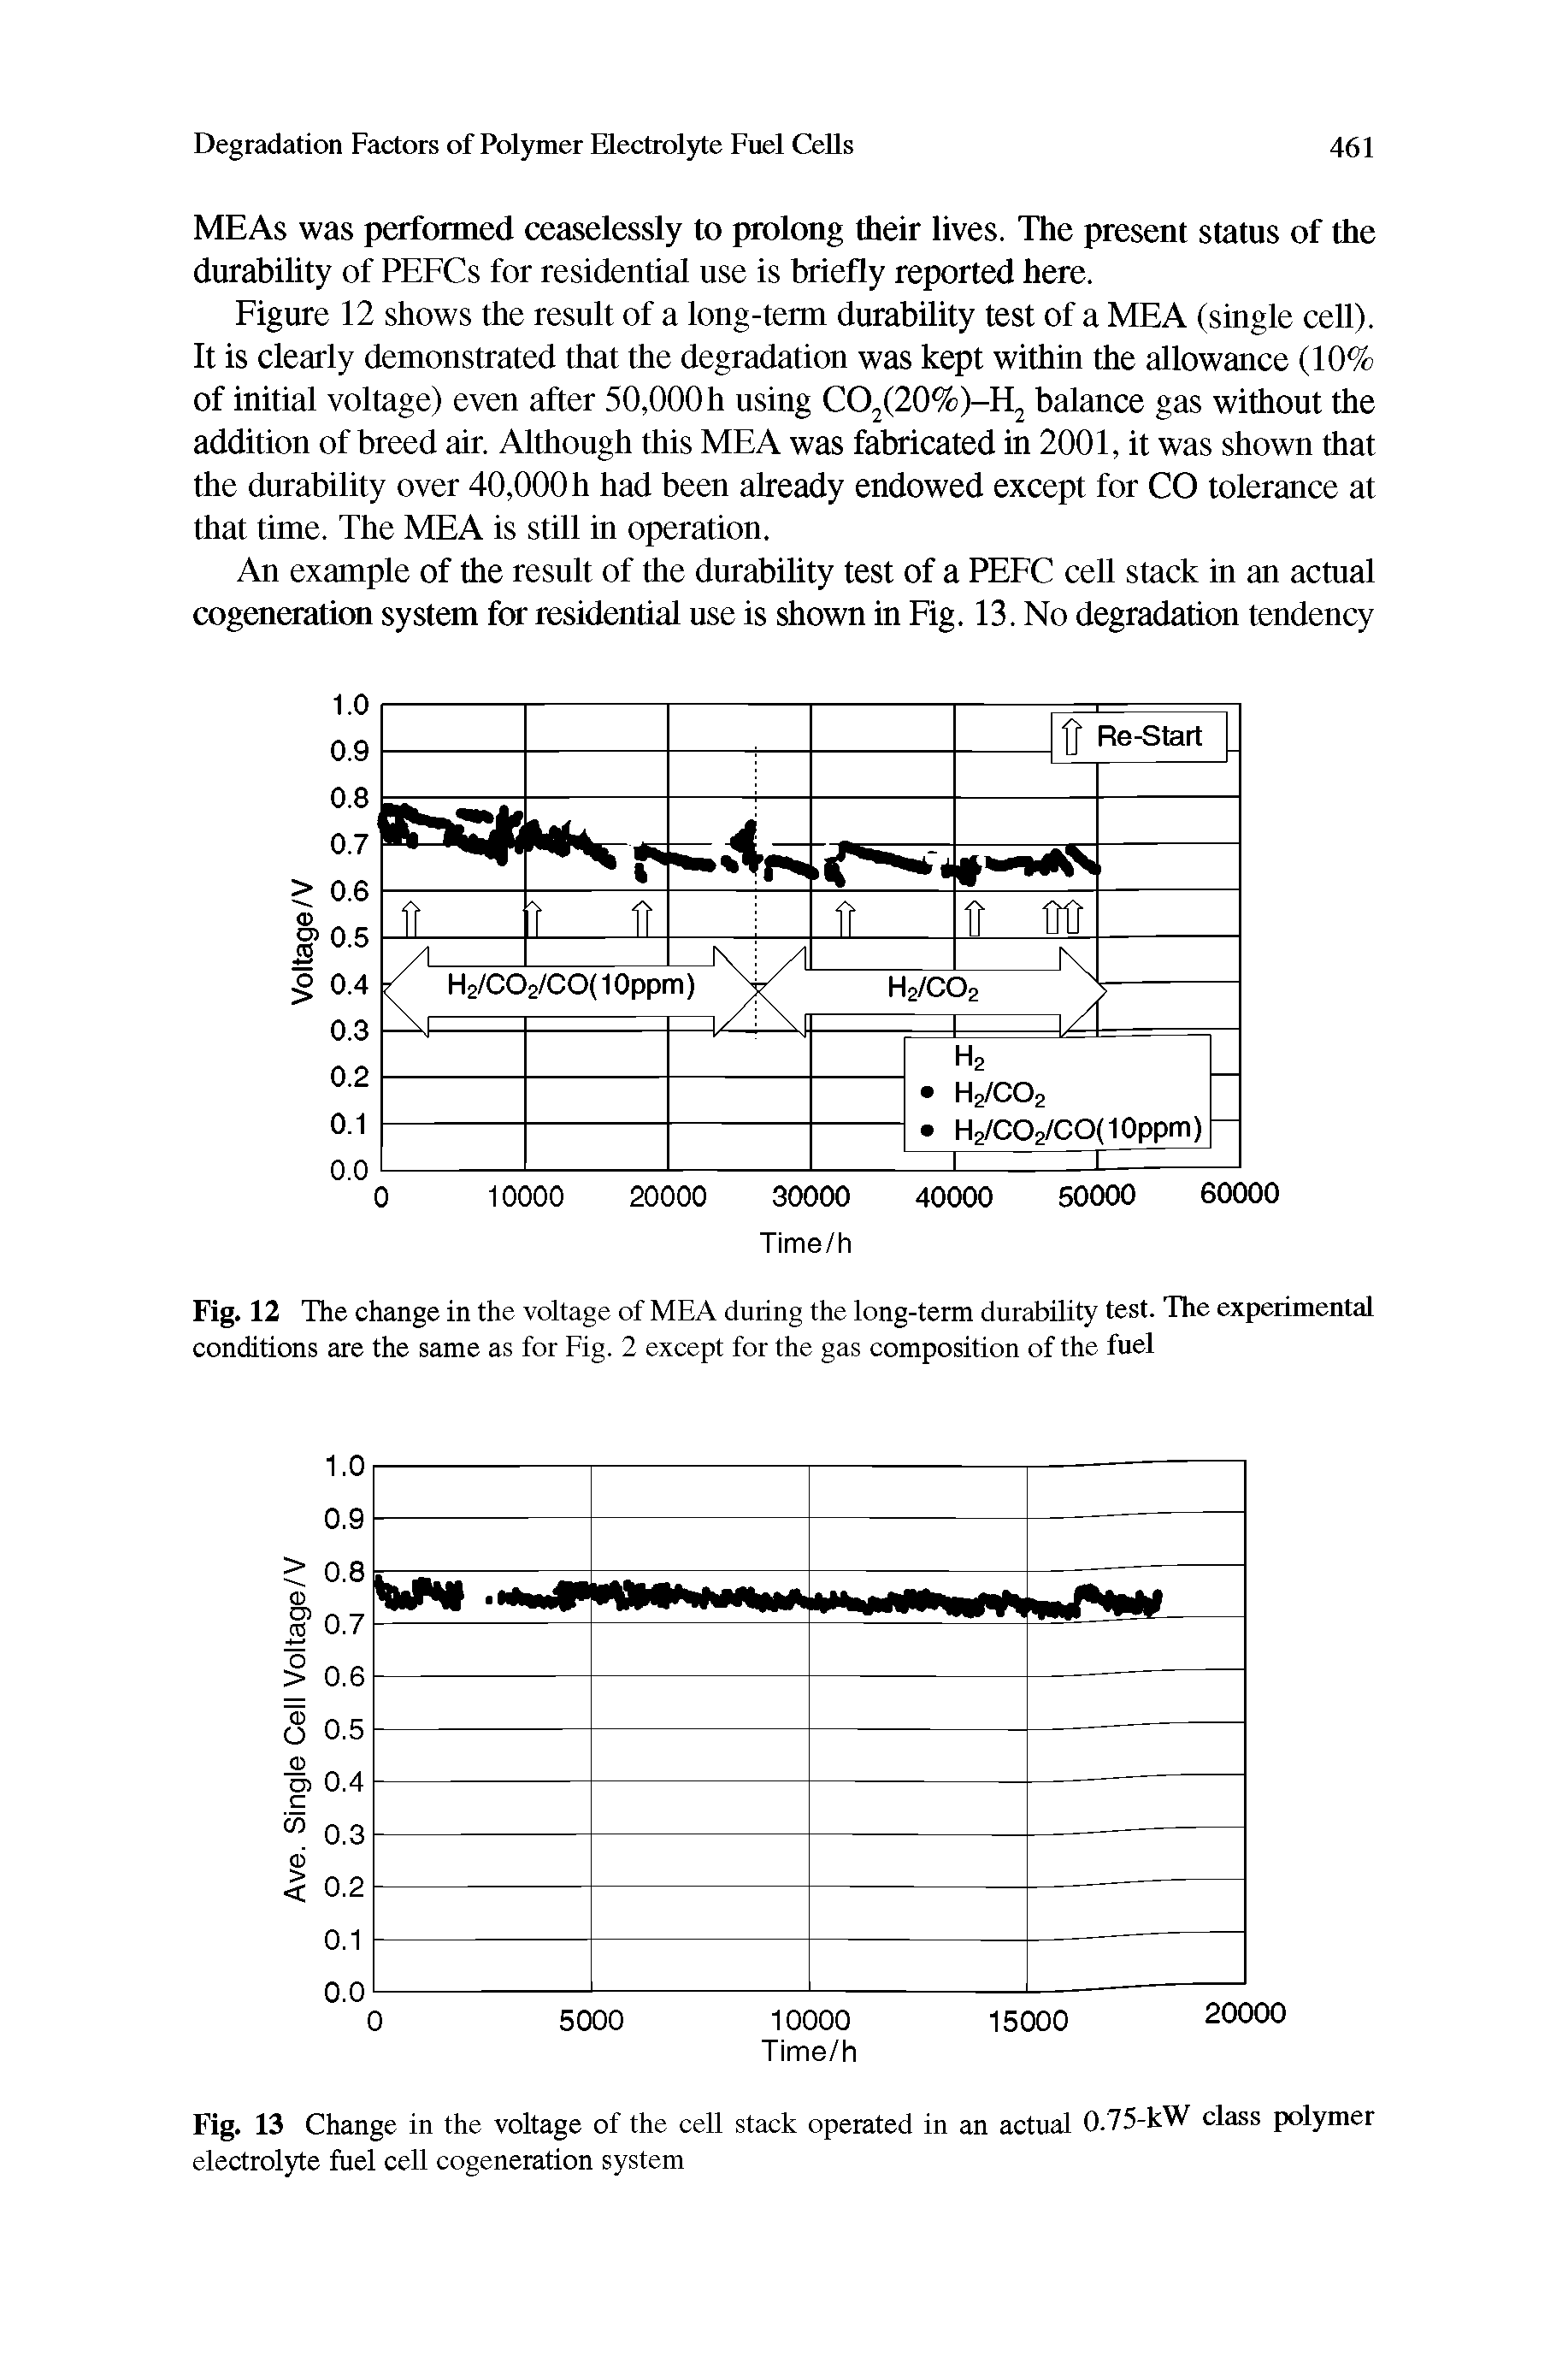 Fig. 12 The change in the voltage of MEA during the long-term durability test. The experimental conditions are the same as for Fig. 2 except for the gas composition of the fuel...